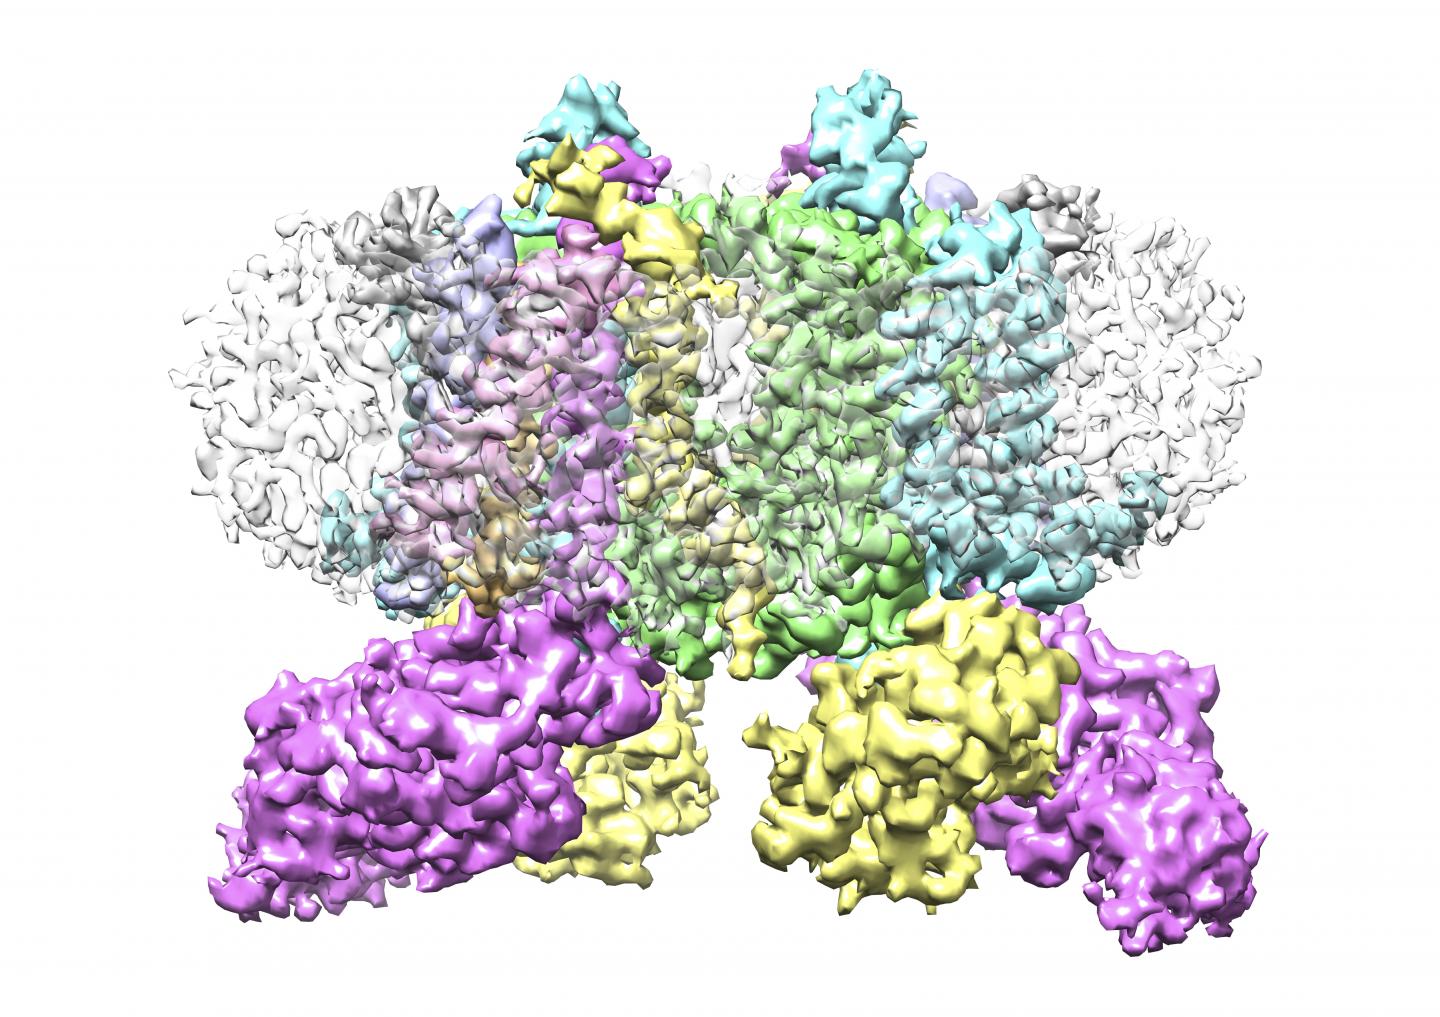 Protein Structure Solved by Study